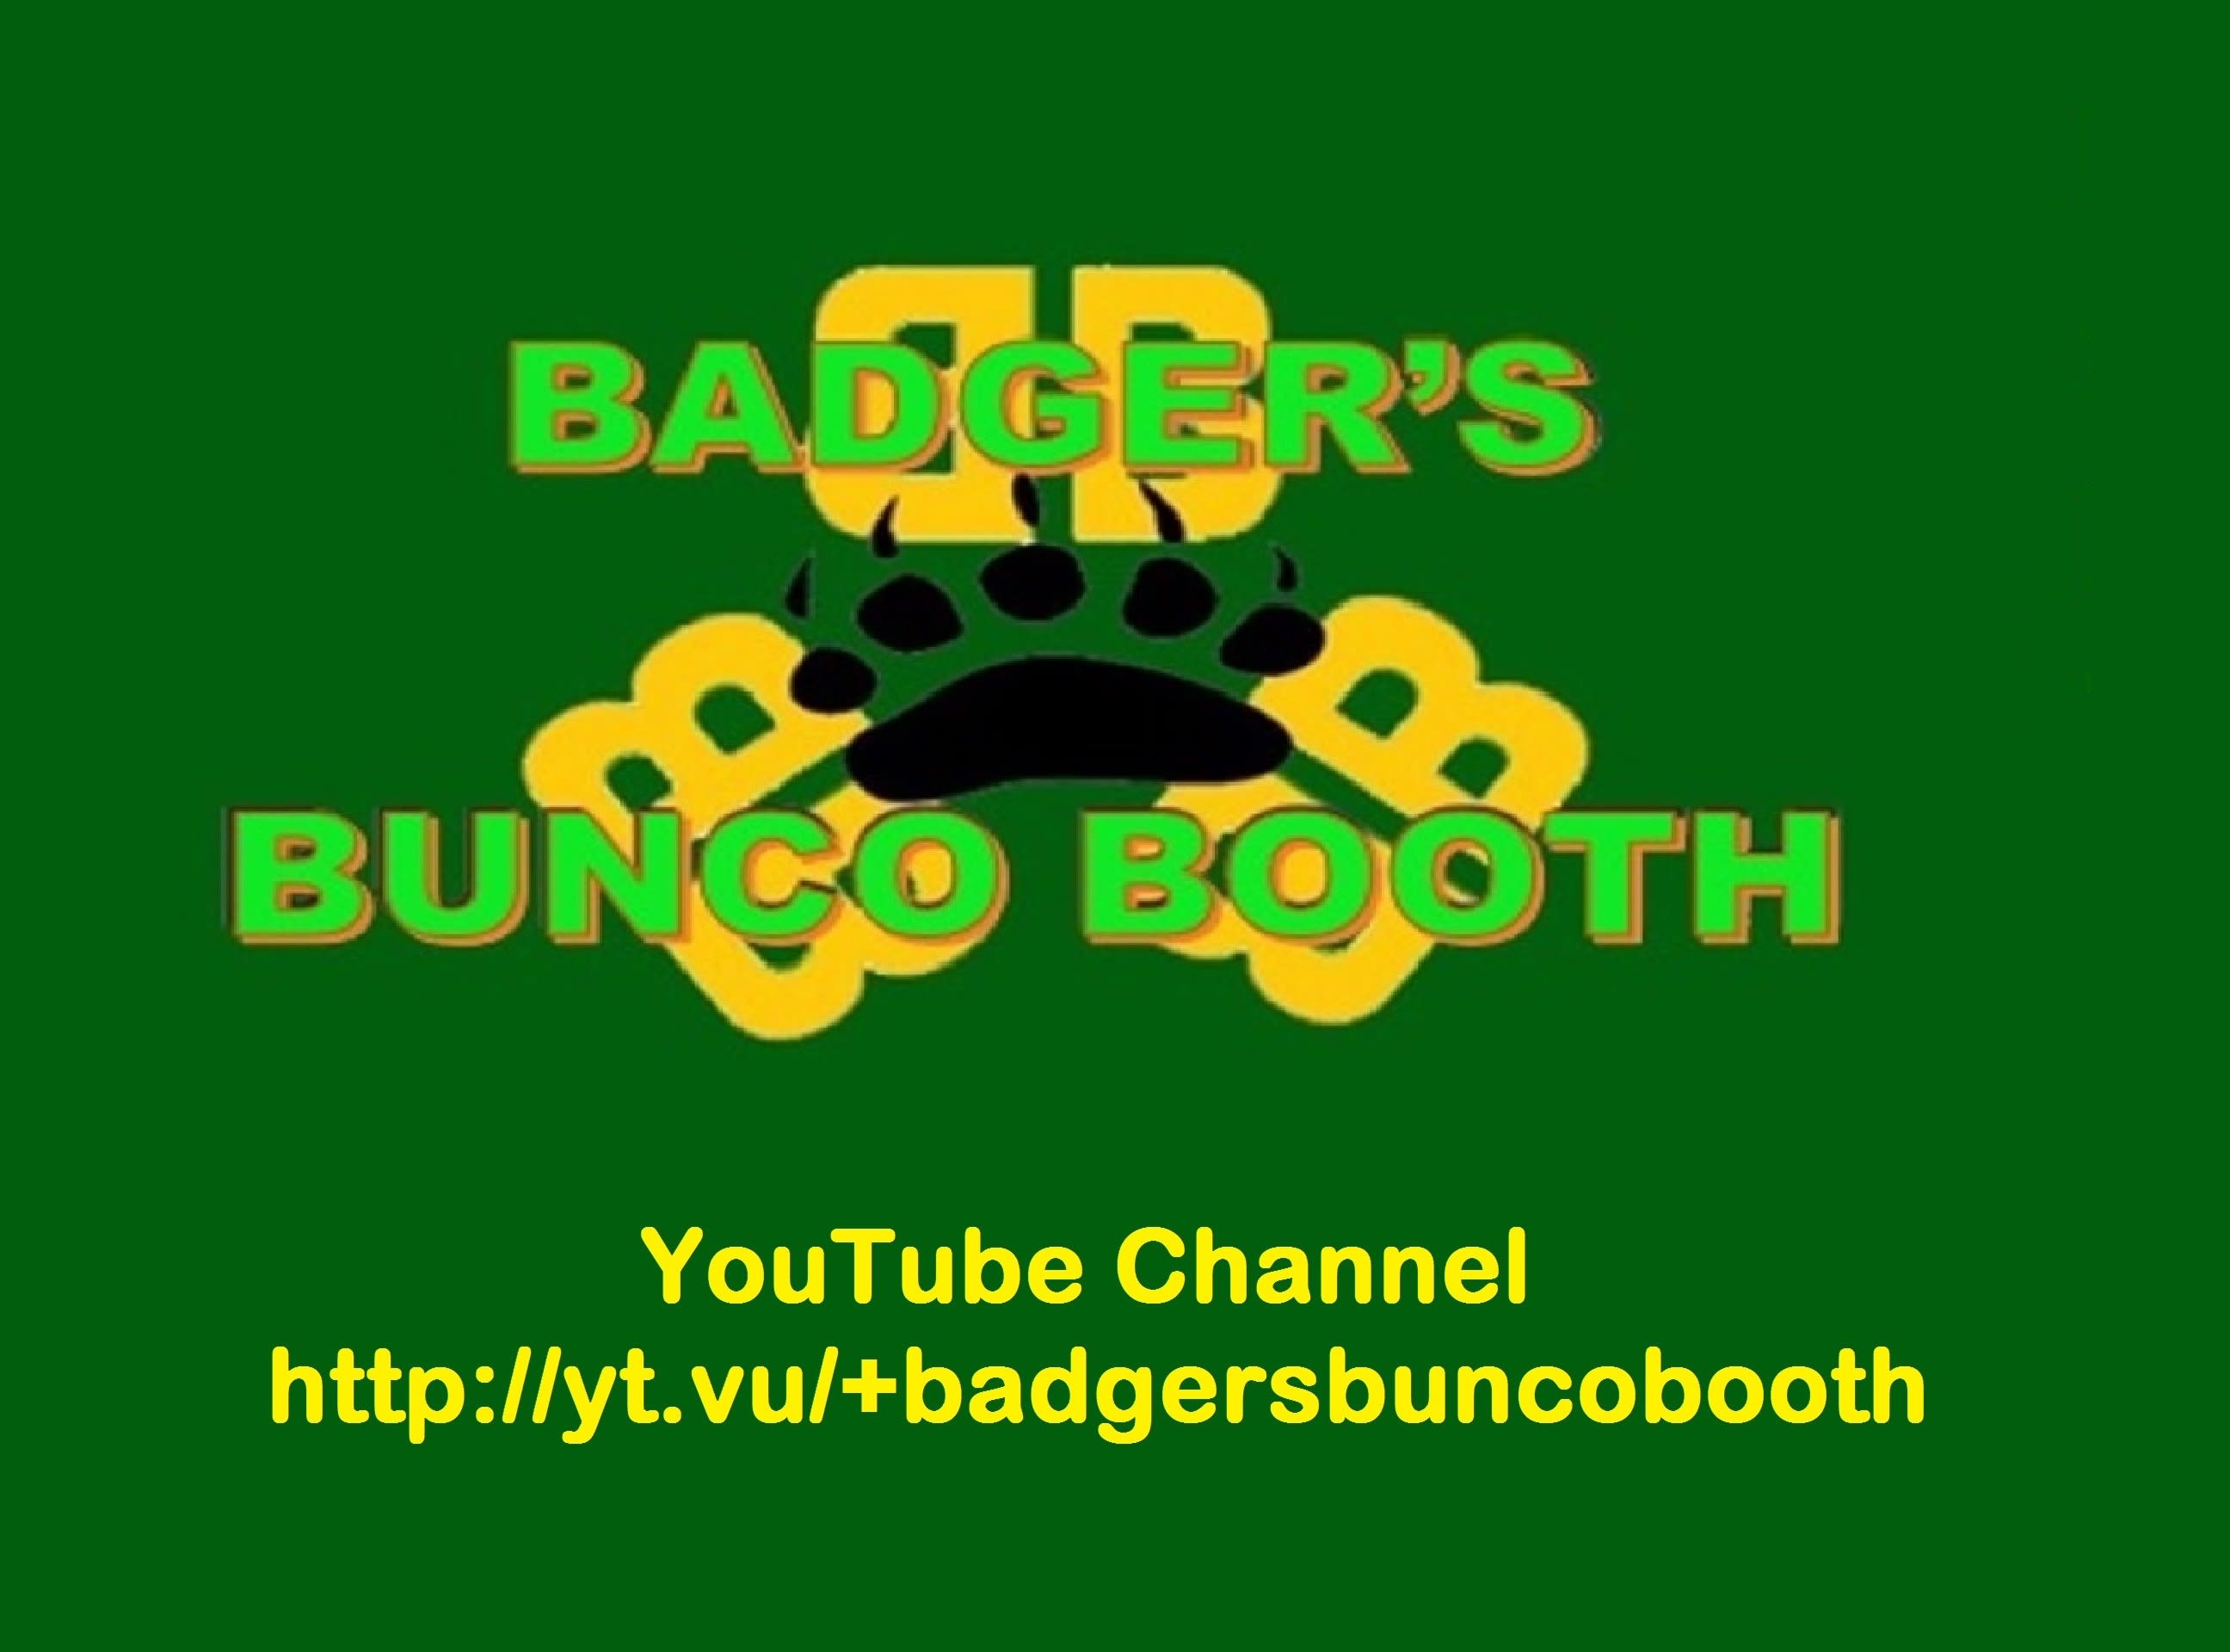 Badgers Bunco Booth